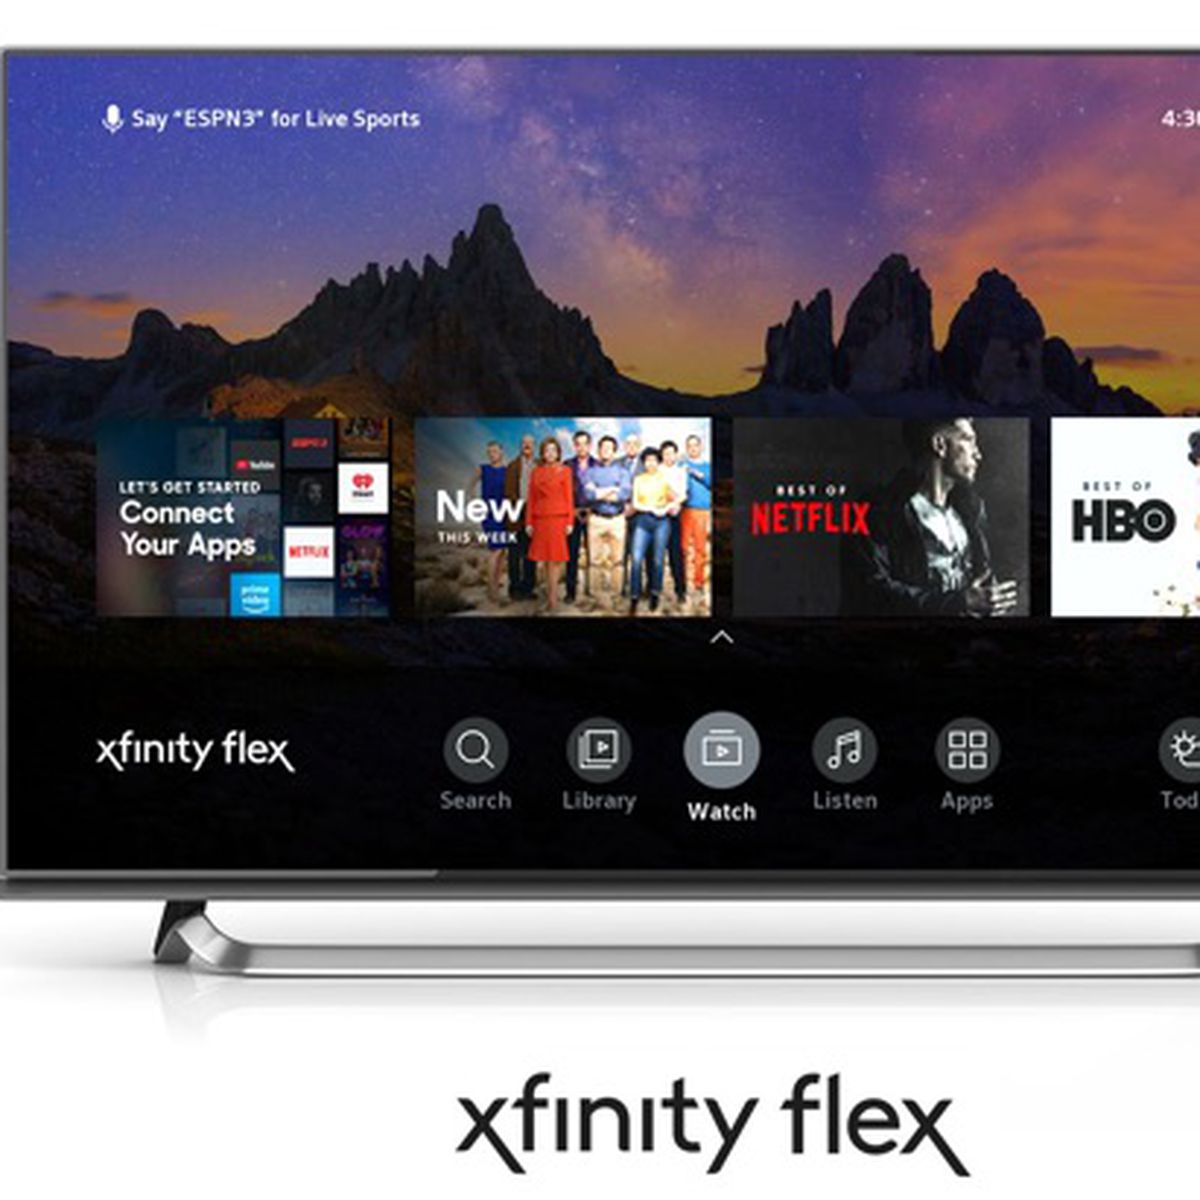 Comcast Launches New $5 Month Ad-Supported Streaming TV Service - MacRumors